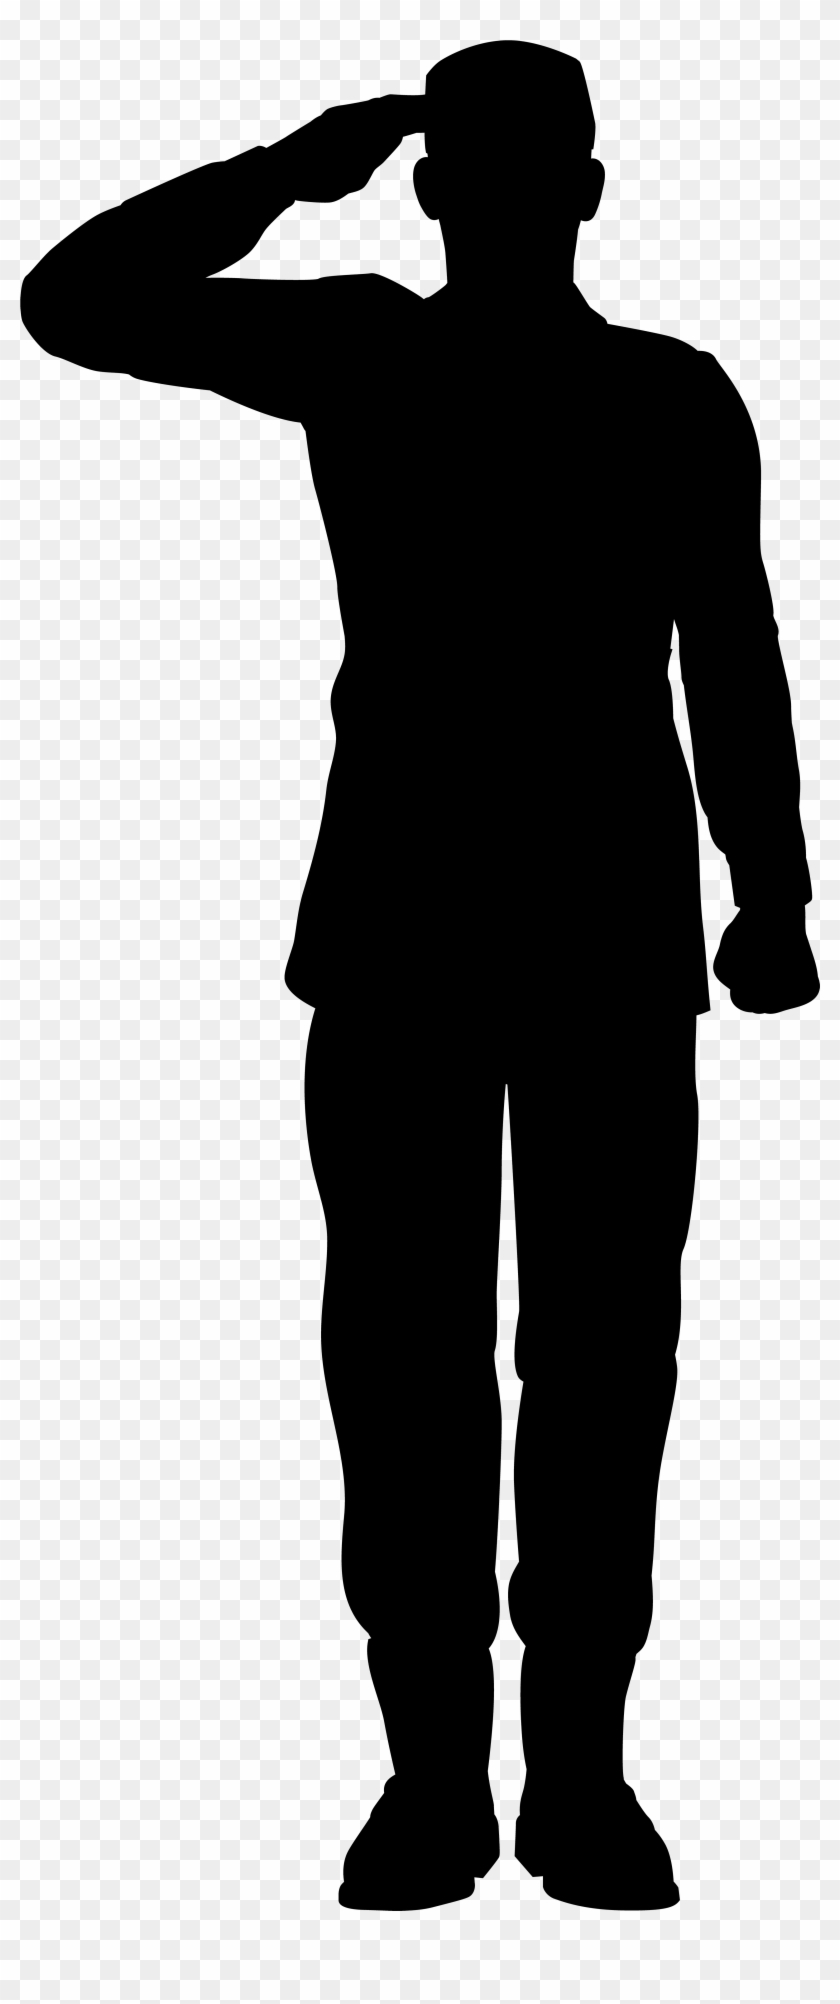 Army Soldier Saluting Silhouette Png Clip Art Image - Soldier Saluting Clipart Transparent Png #259121